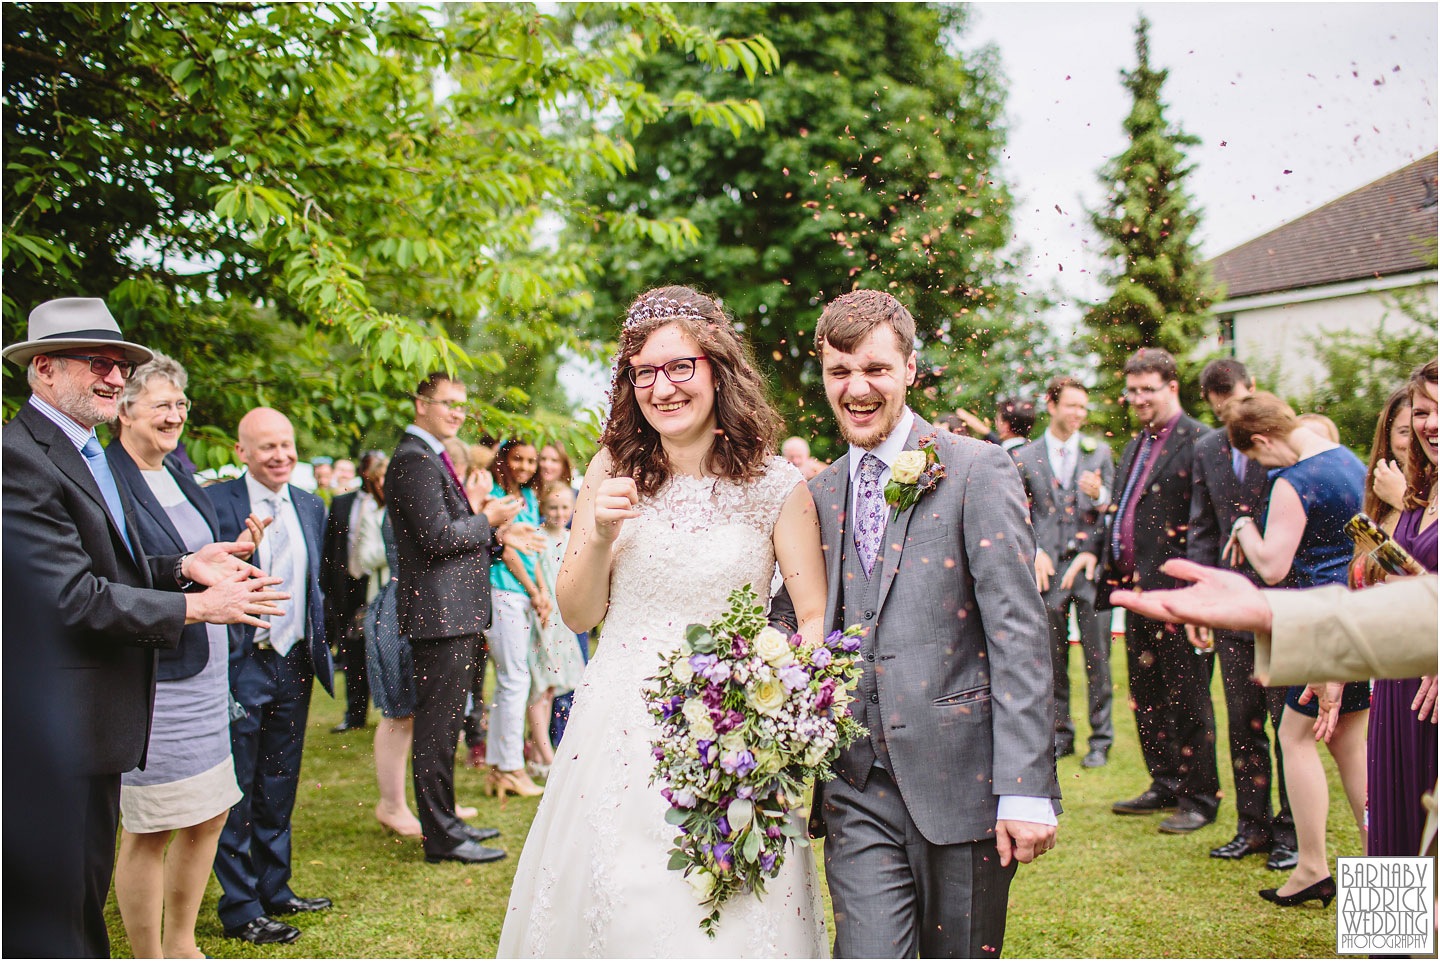 A photo from a spring wedding at Christ Church in St Albans near London in England